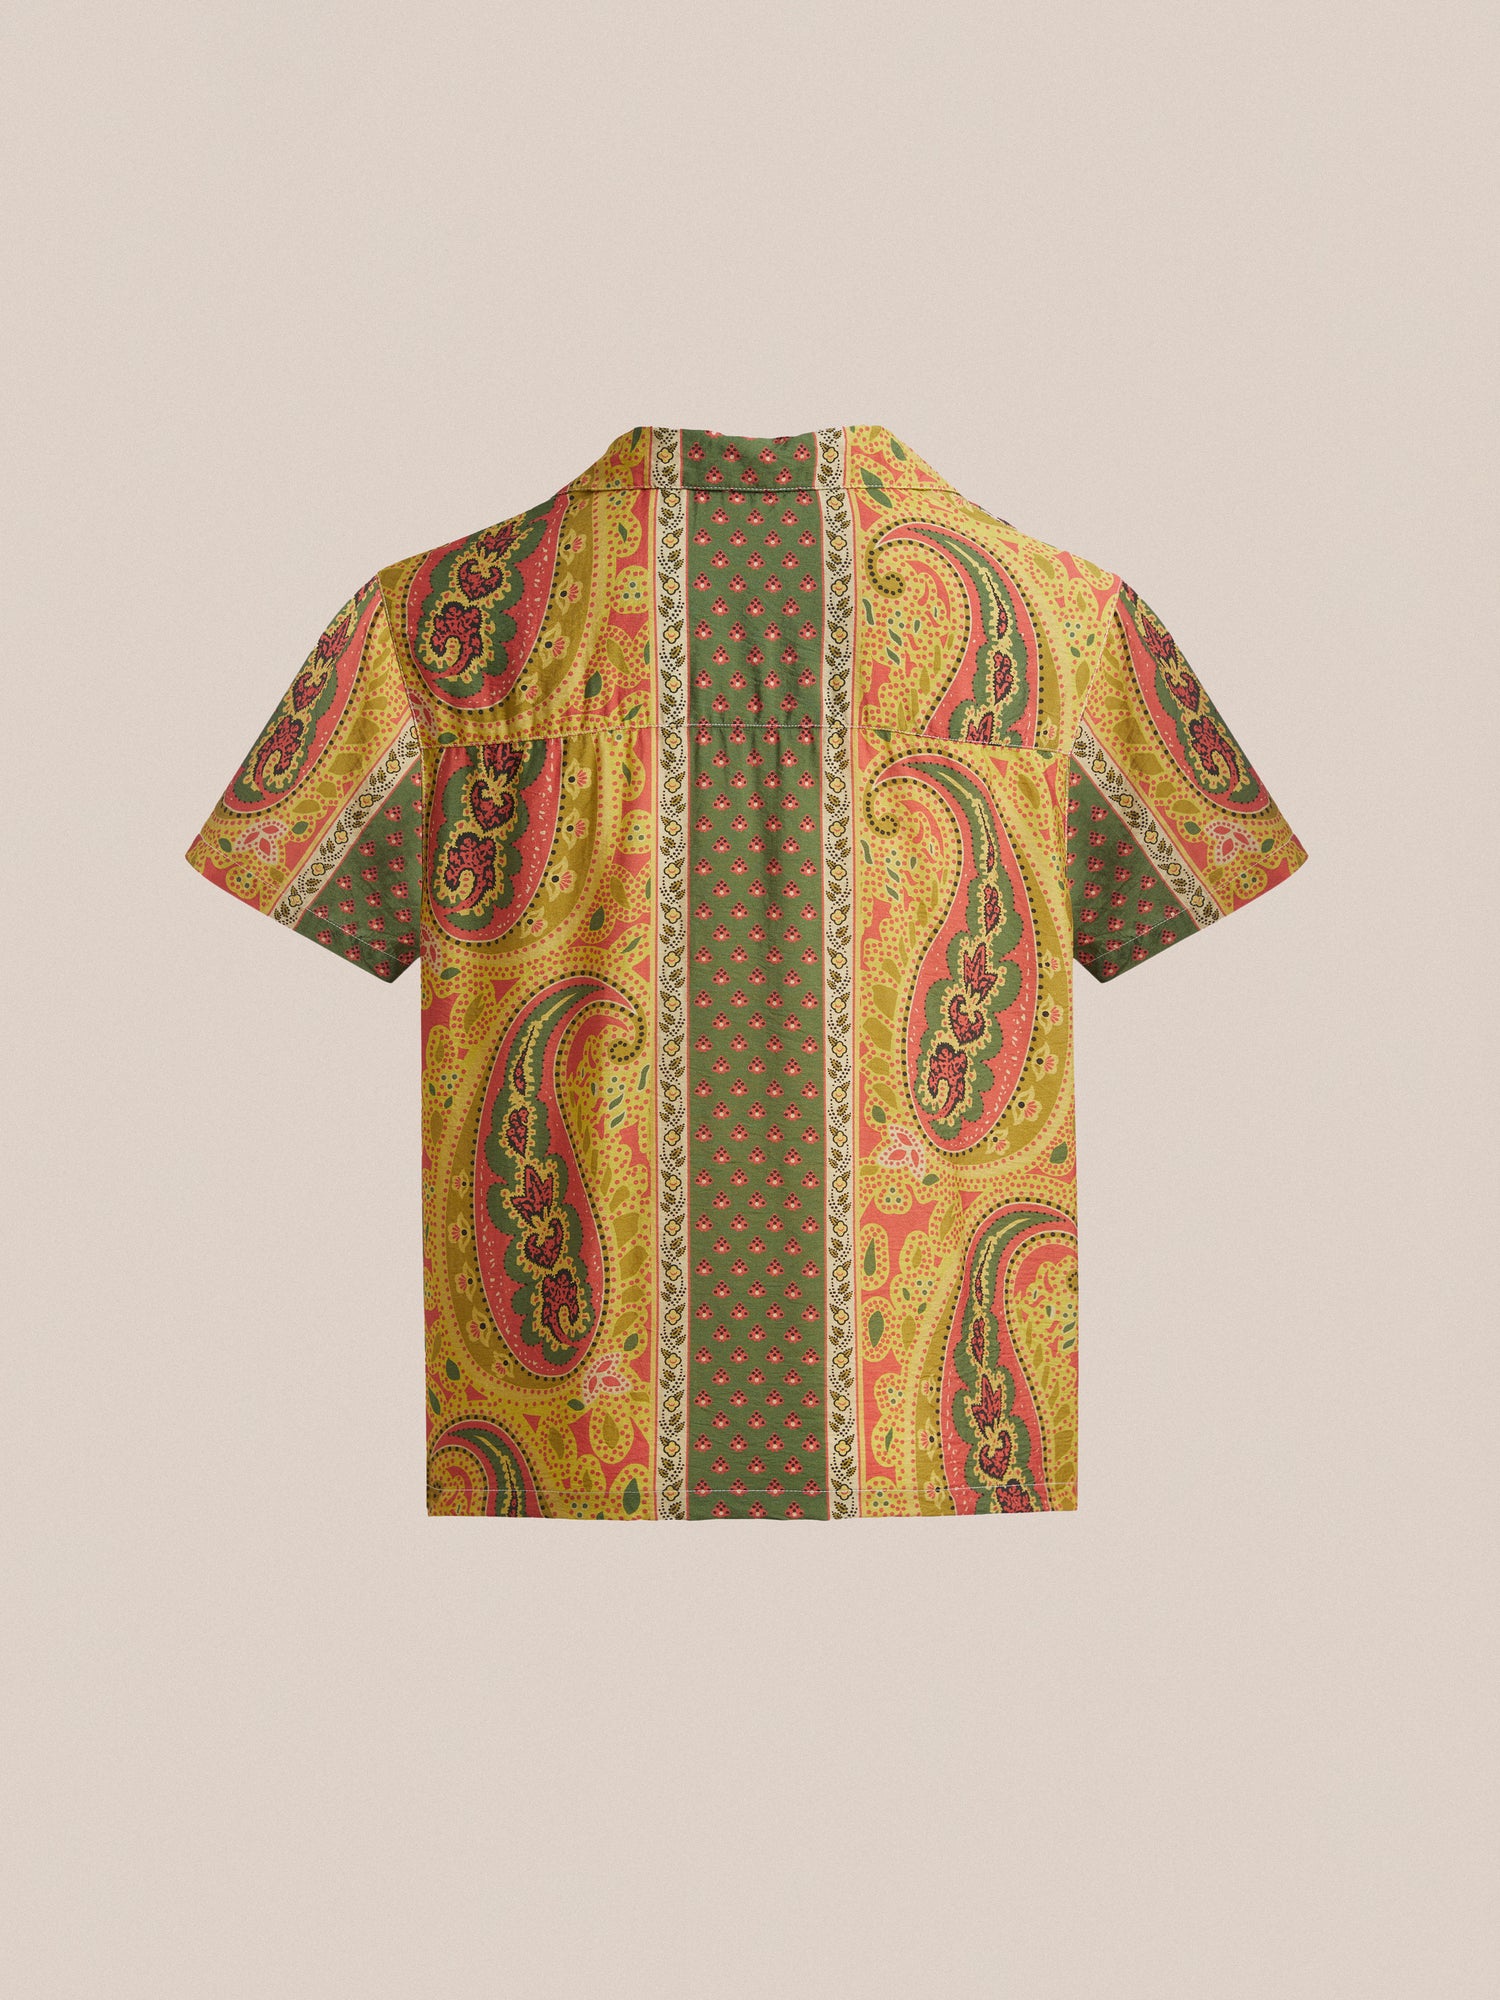 A Pench Paisley SS Camp Shirt by Found, reflecting its cultural heritage with a Paisley prints pattern on it.